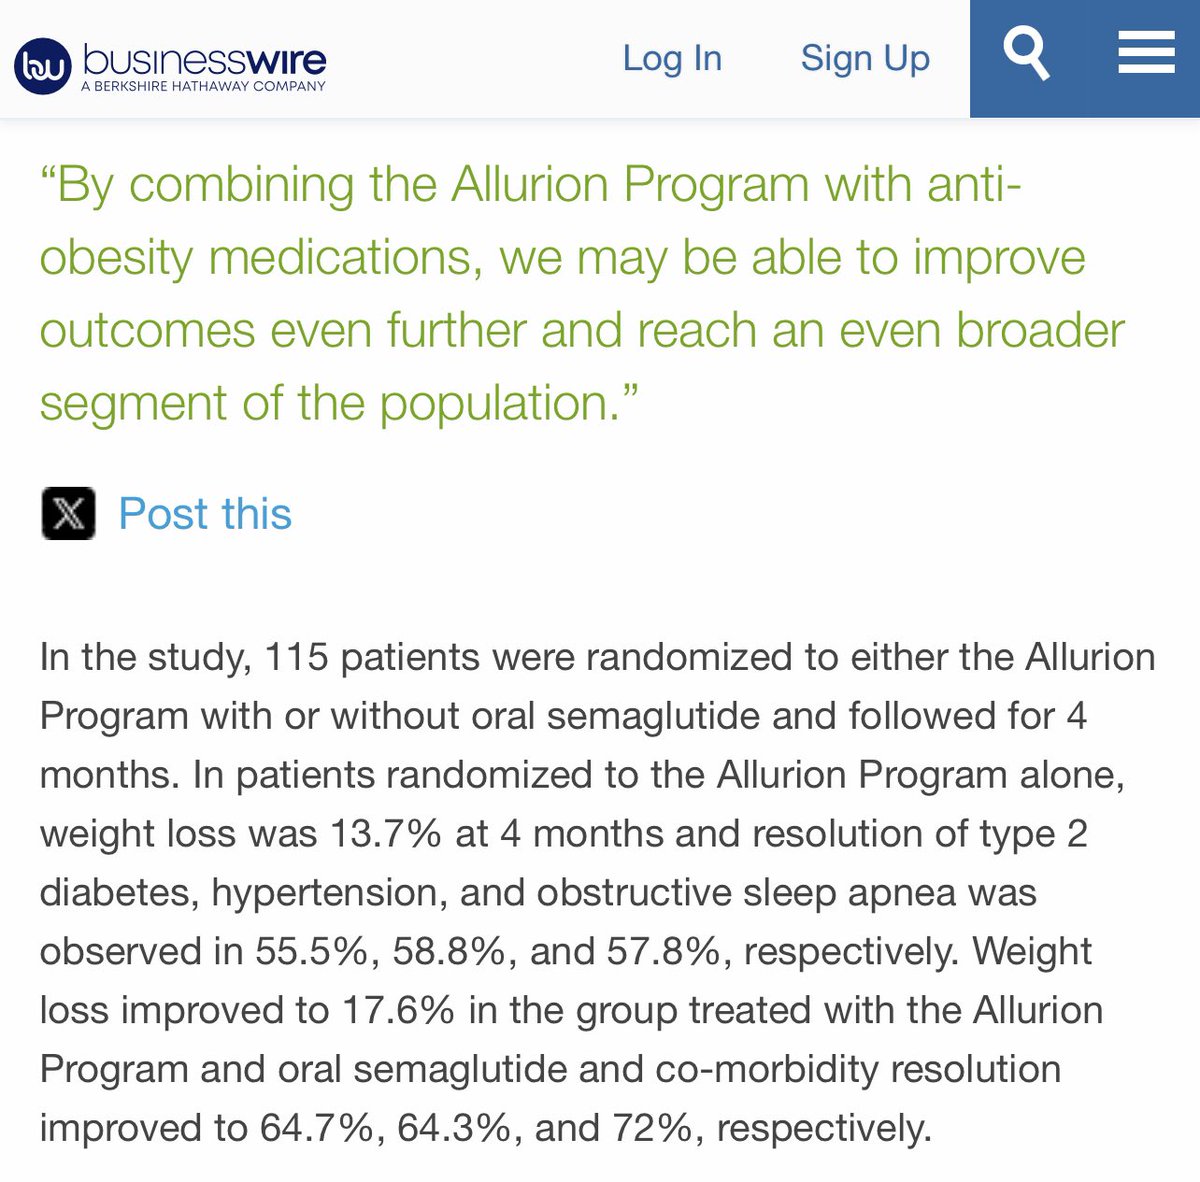 In a new study (pending publication) of patients with obesity and ABCDs (N=115) randomized to Allurion vs. Allurion + Sema, both cohorts demonstrated impressive weight reduction and improvements in ABCDs in as little as 4 mo. Looking forward to the pub. 
businesswire.com/news/home/2024…